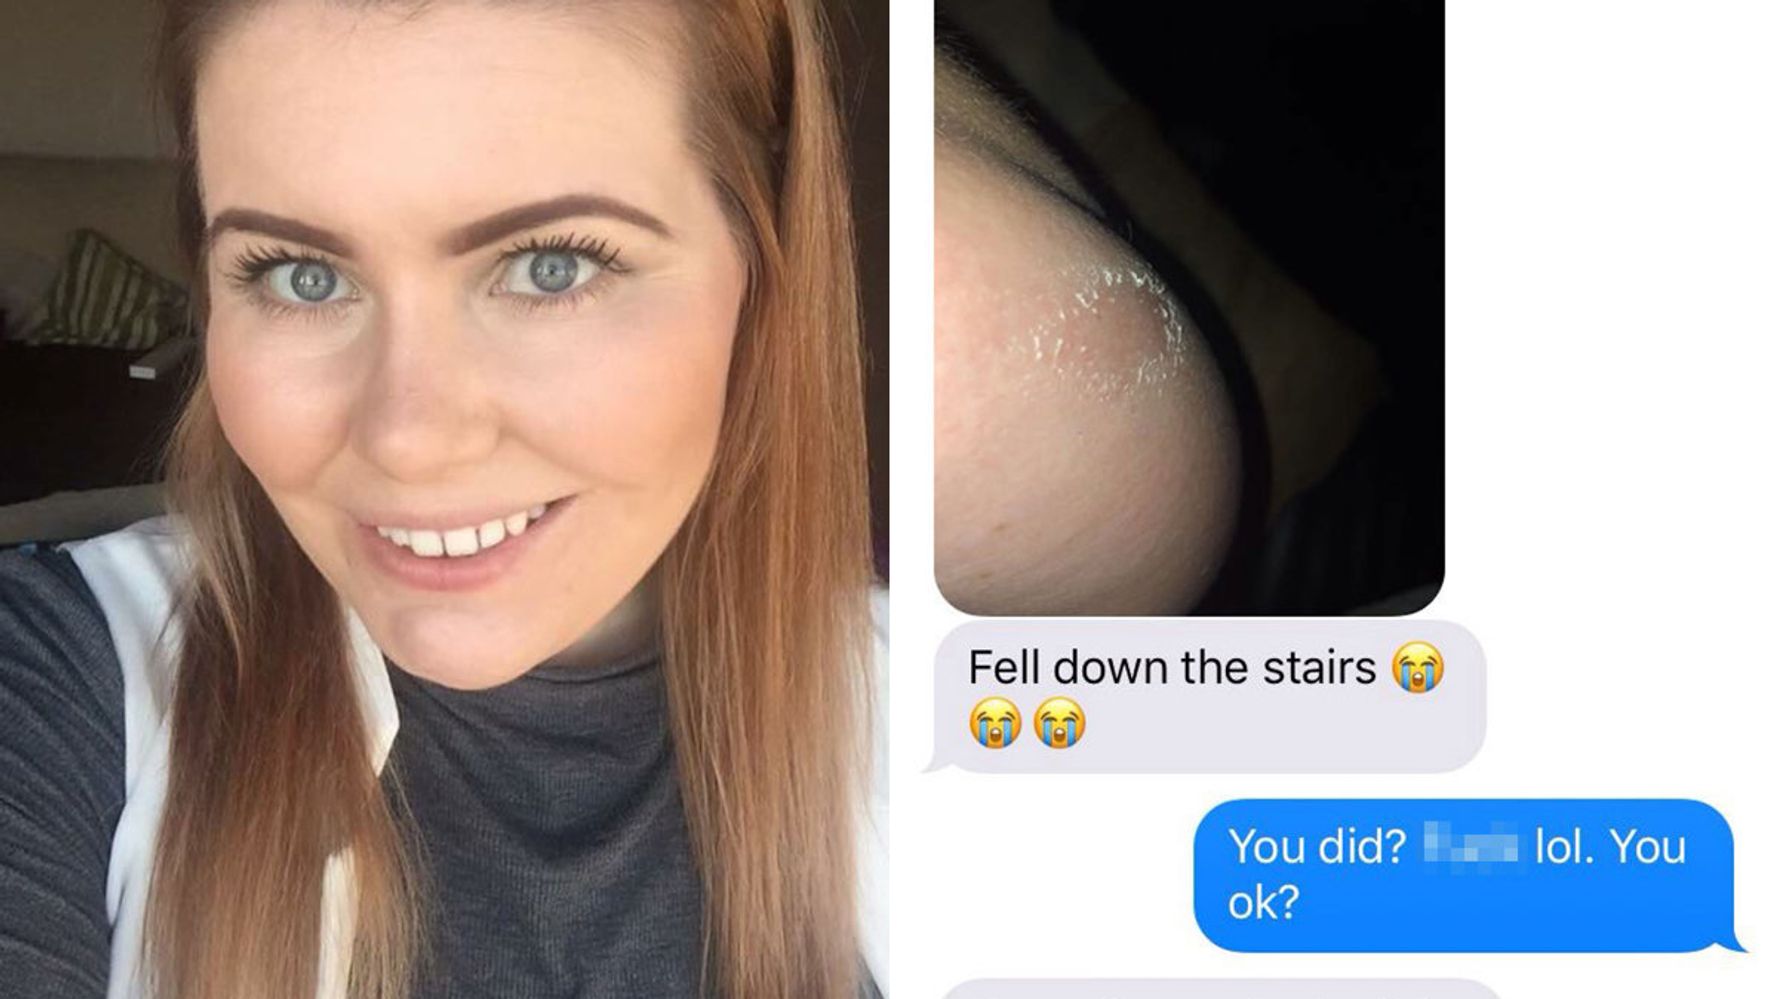 Mum Convinces 26-Year-Old Daughter Her Nipple Has Fallen Off In